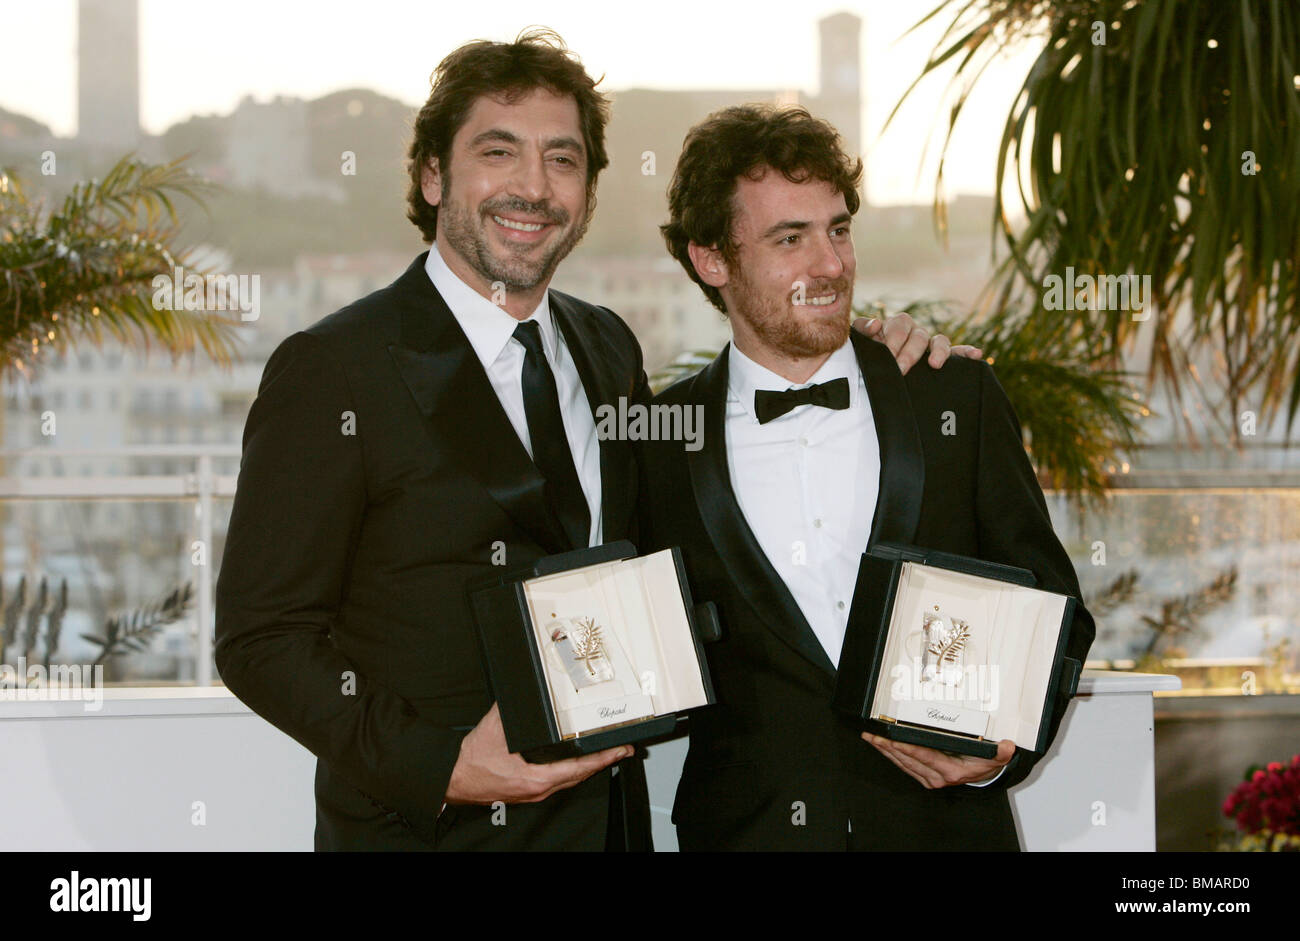 JAVIER BARDEM & ELIO GERMANO WINNERS PHOTOCALL PALAIS DES FESTIVALS CANNES FRANCE 23 May 2010 Stock Photo